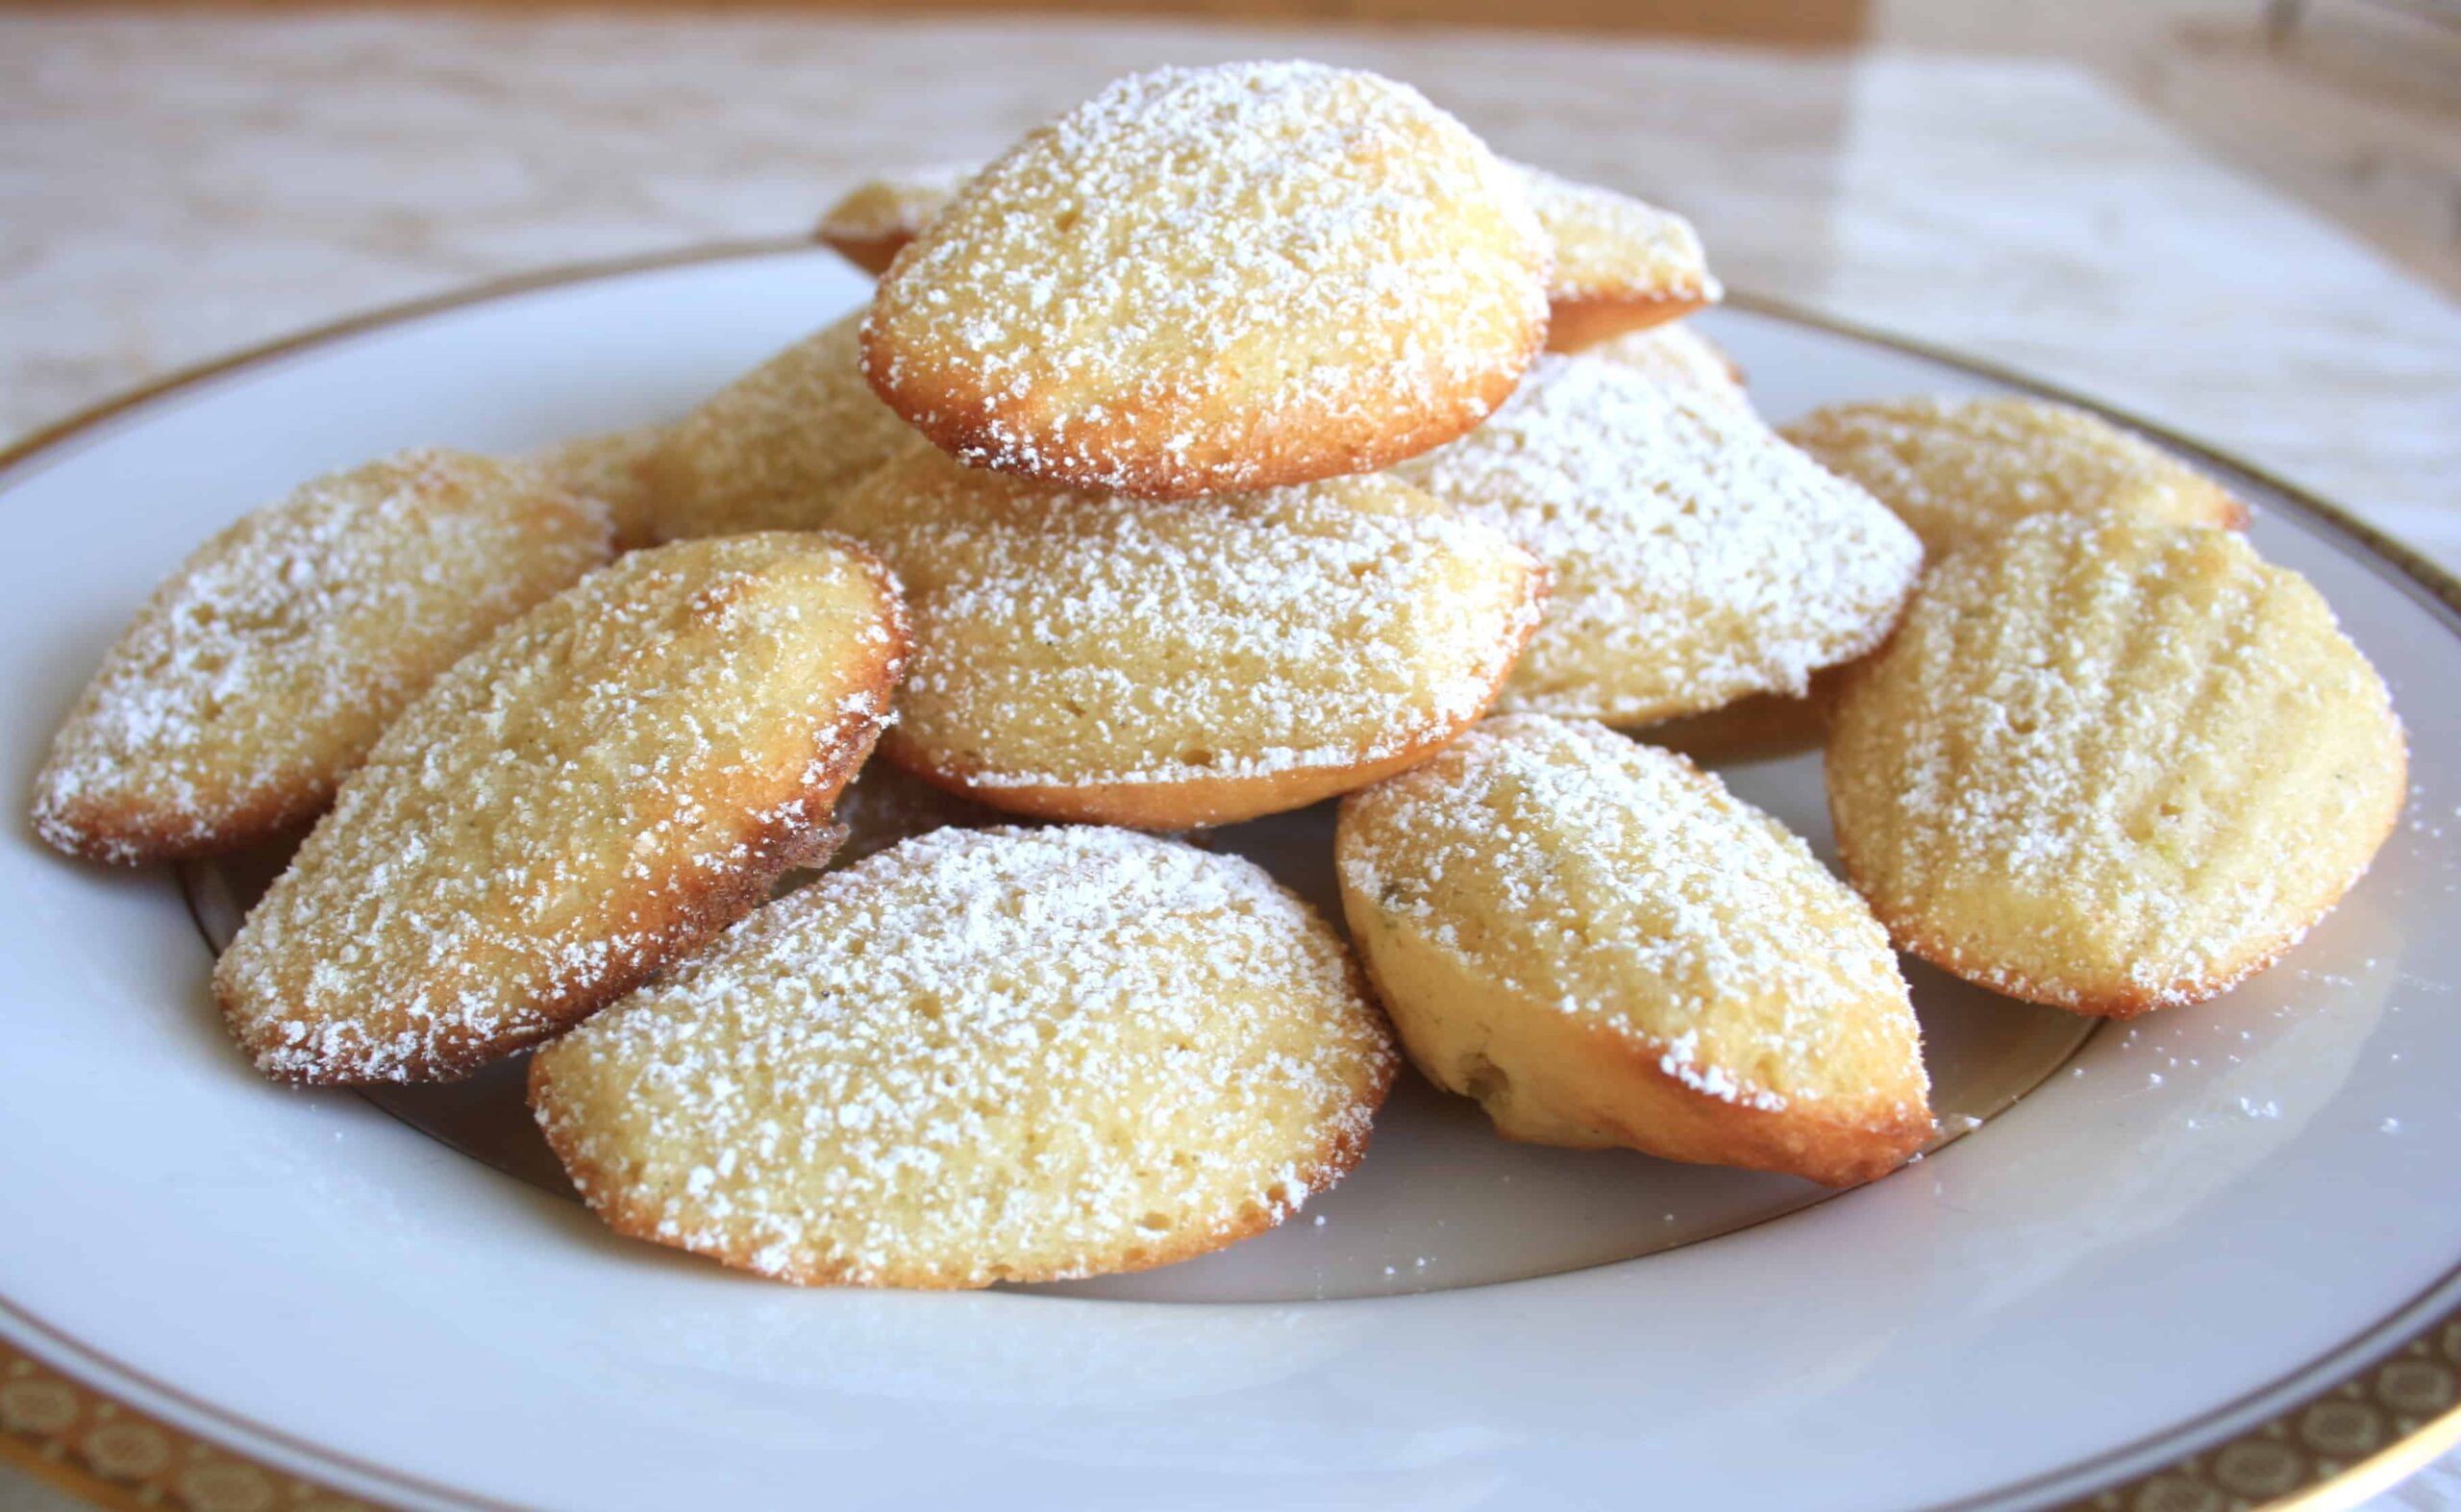 Classic French madeleines on a plate